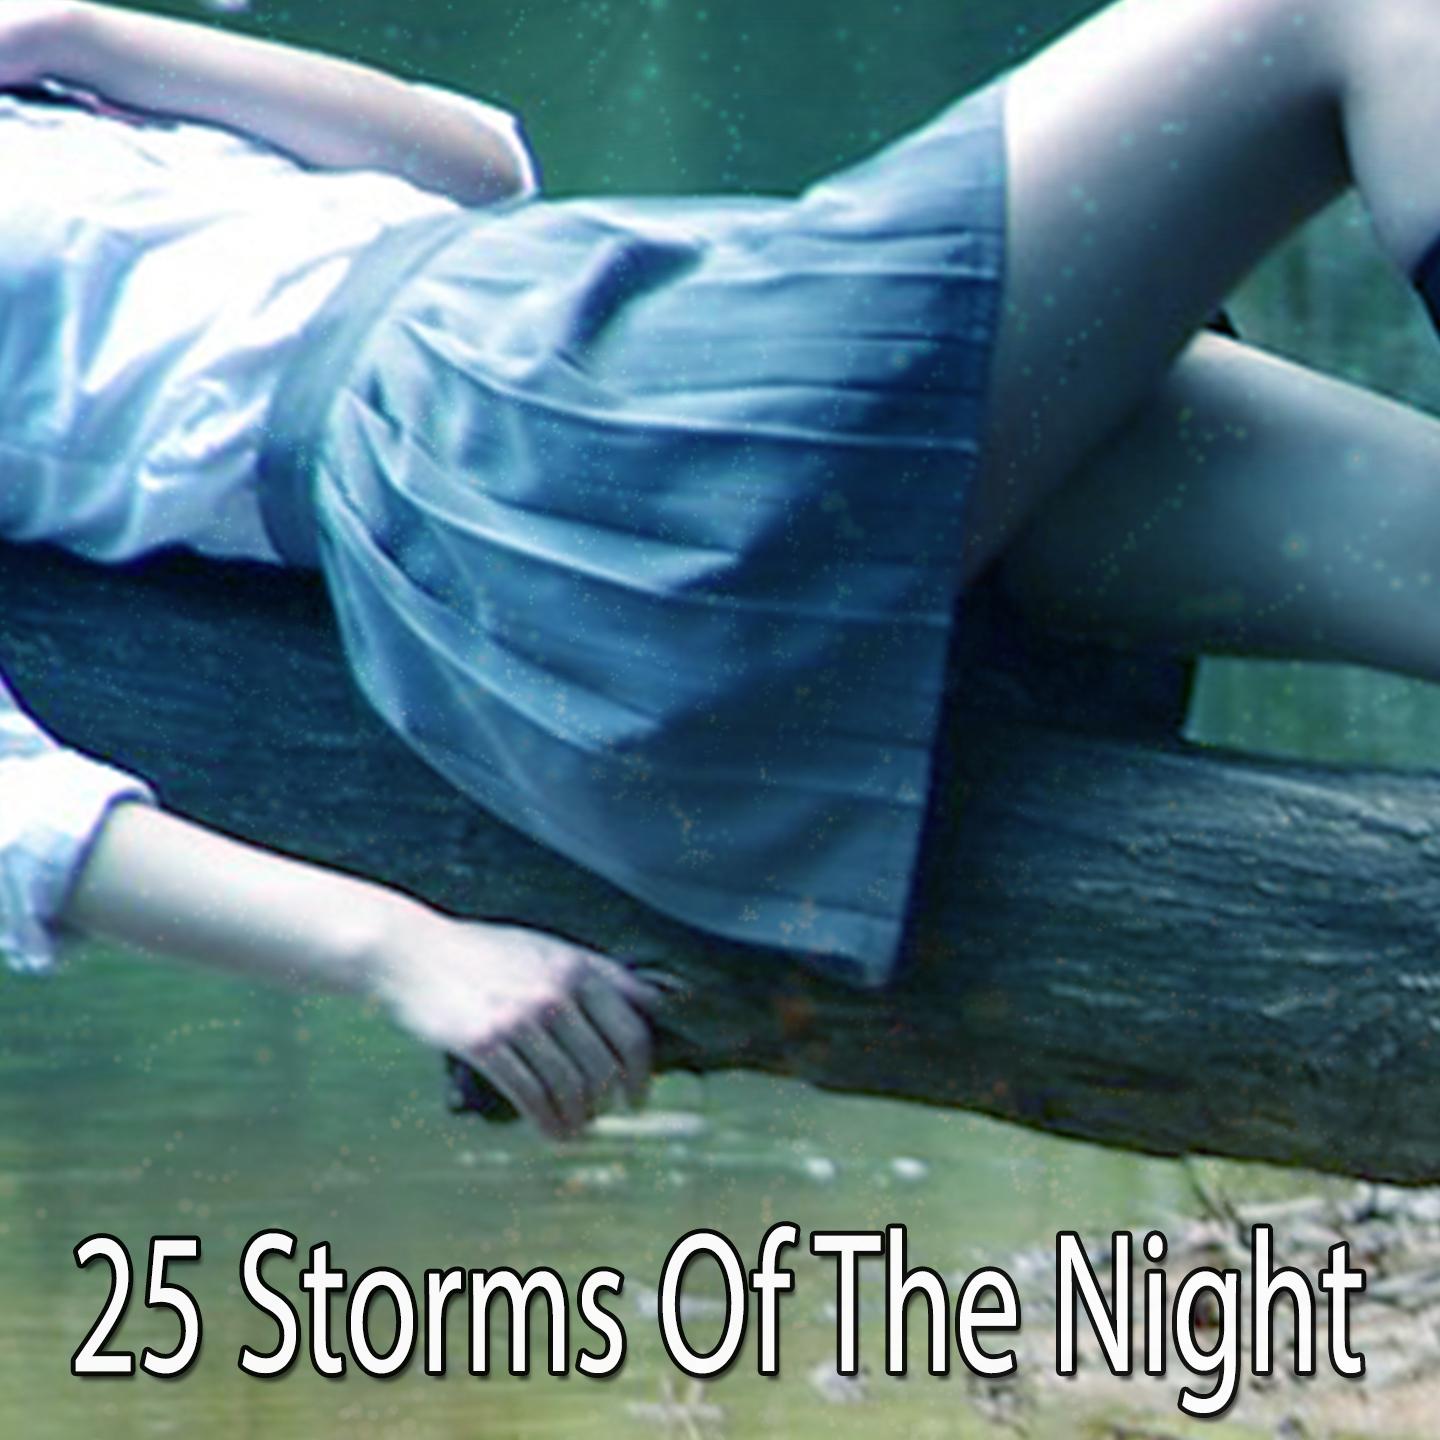 25 Storms Of The Night